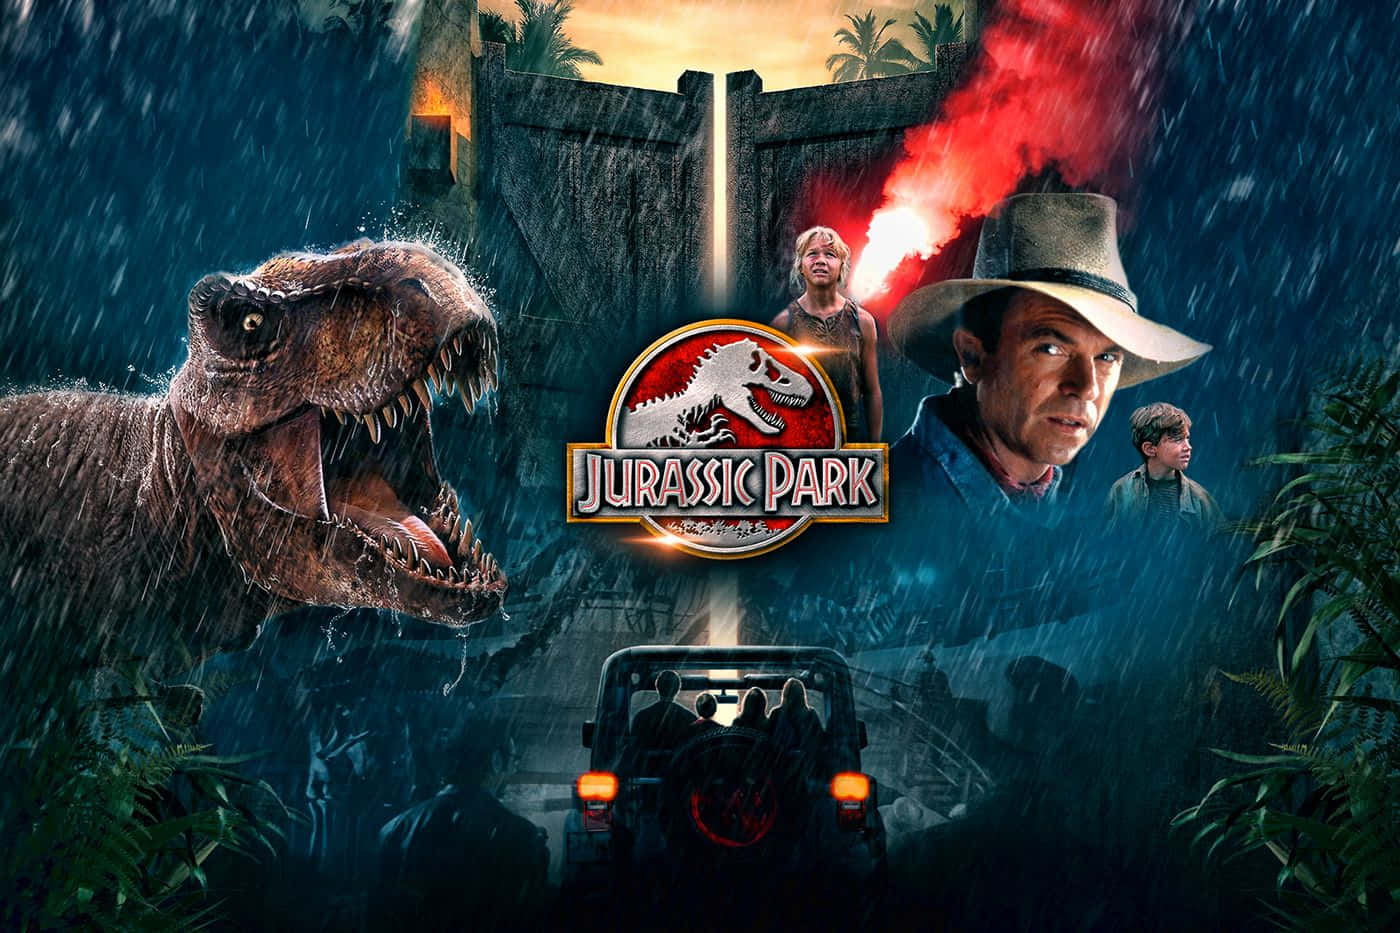 Experience the Island of Jurassic Park